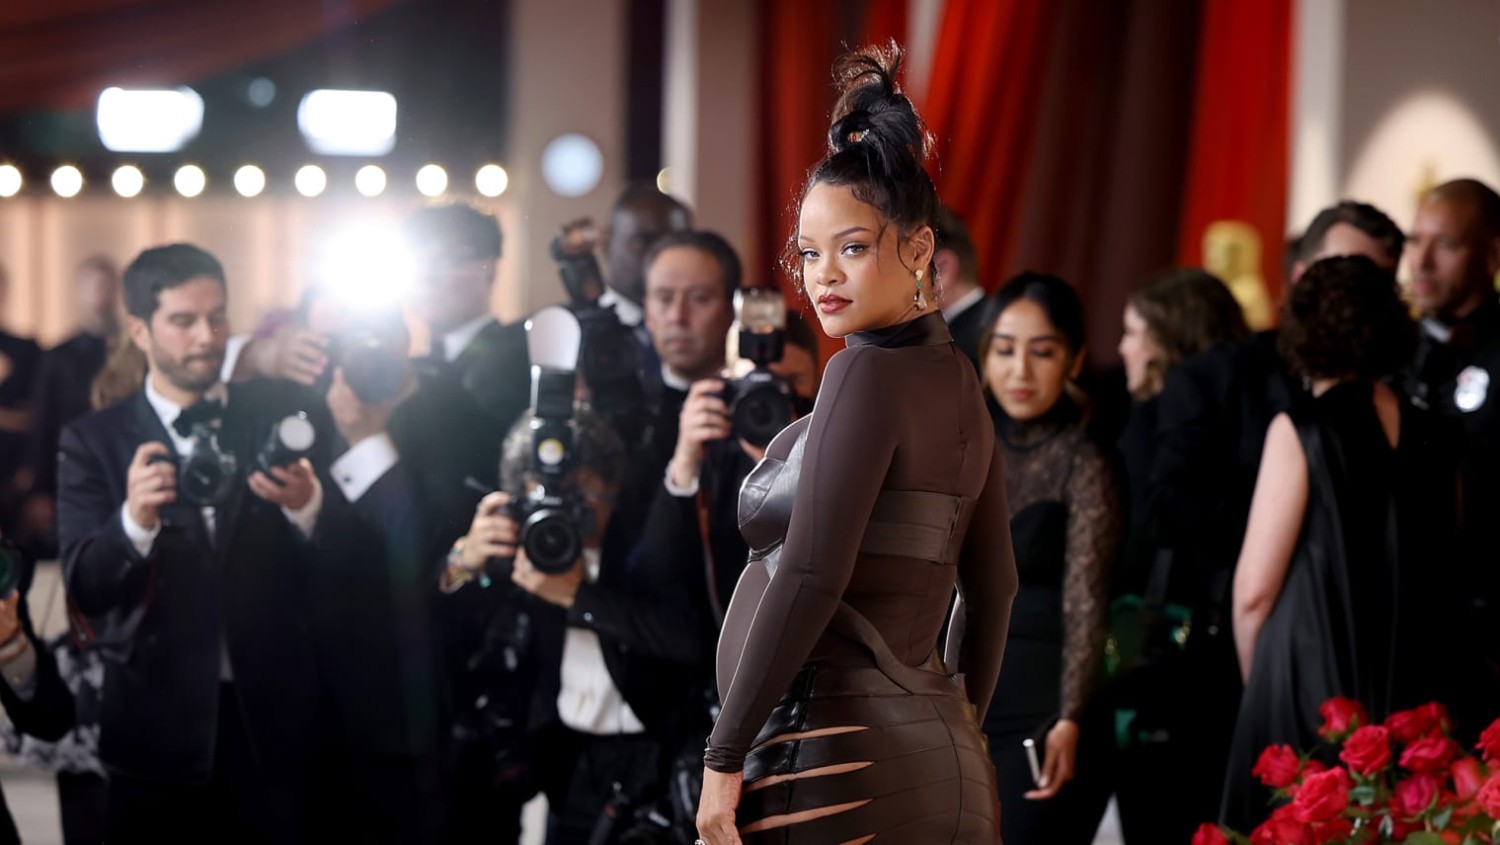 Top photo: Rihanna (Mike Coppola/Getty Images)